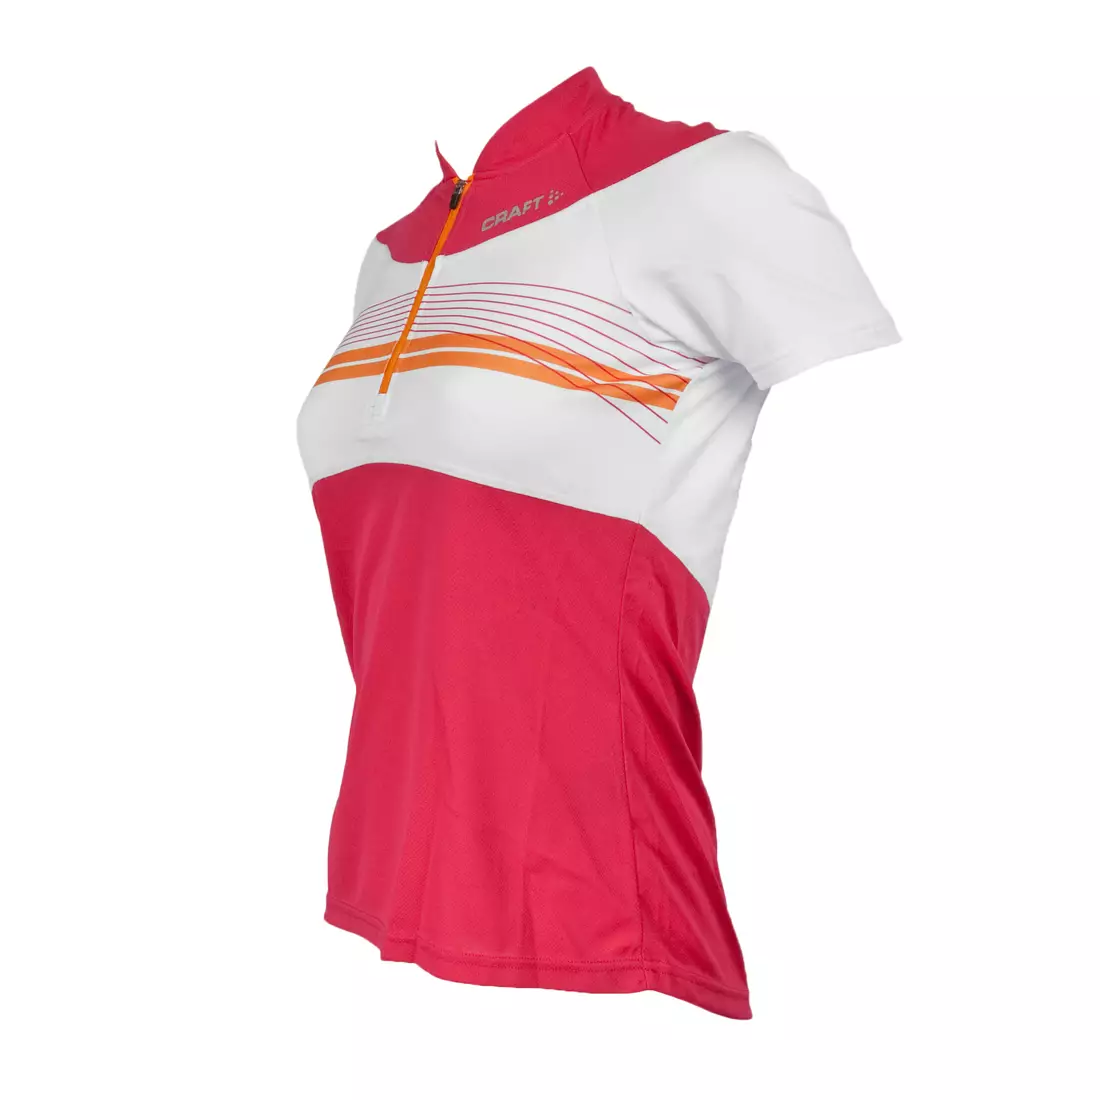 CRAFT ACTIVE BIKE - women's cycling jersey 1901942-2477, color: white and pink